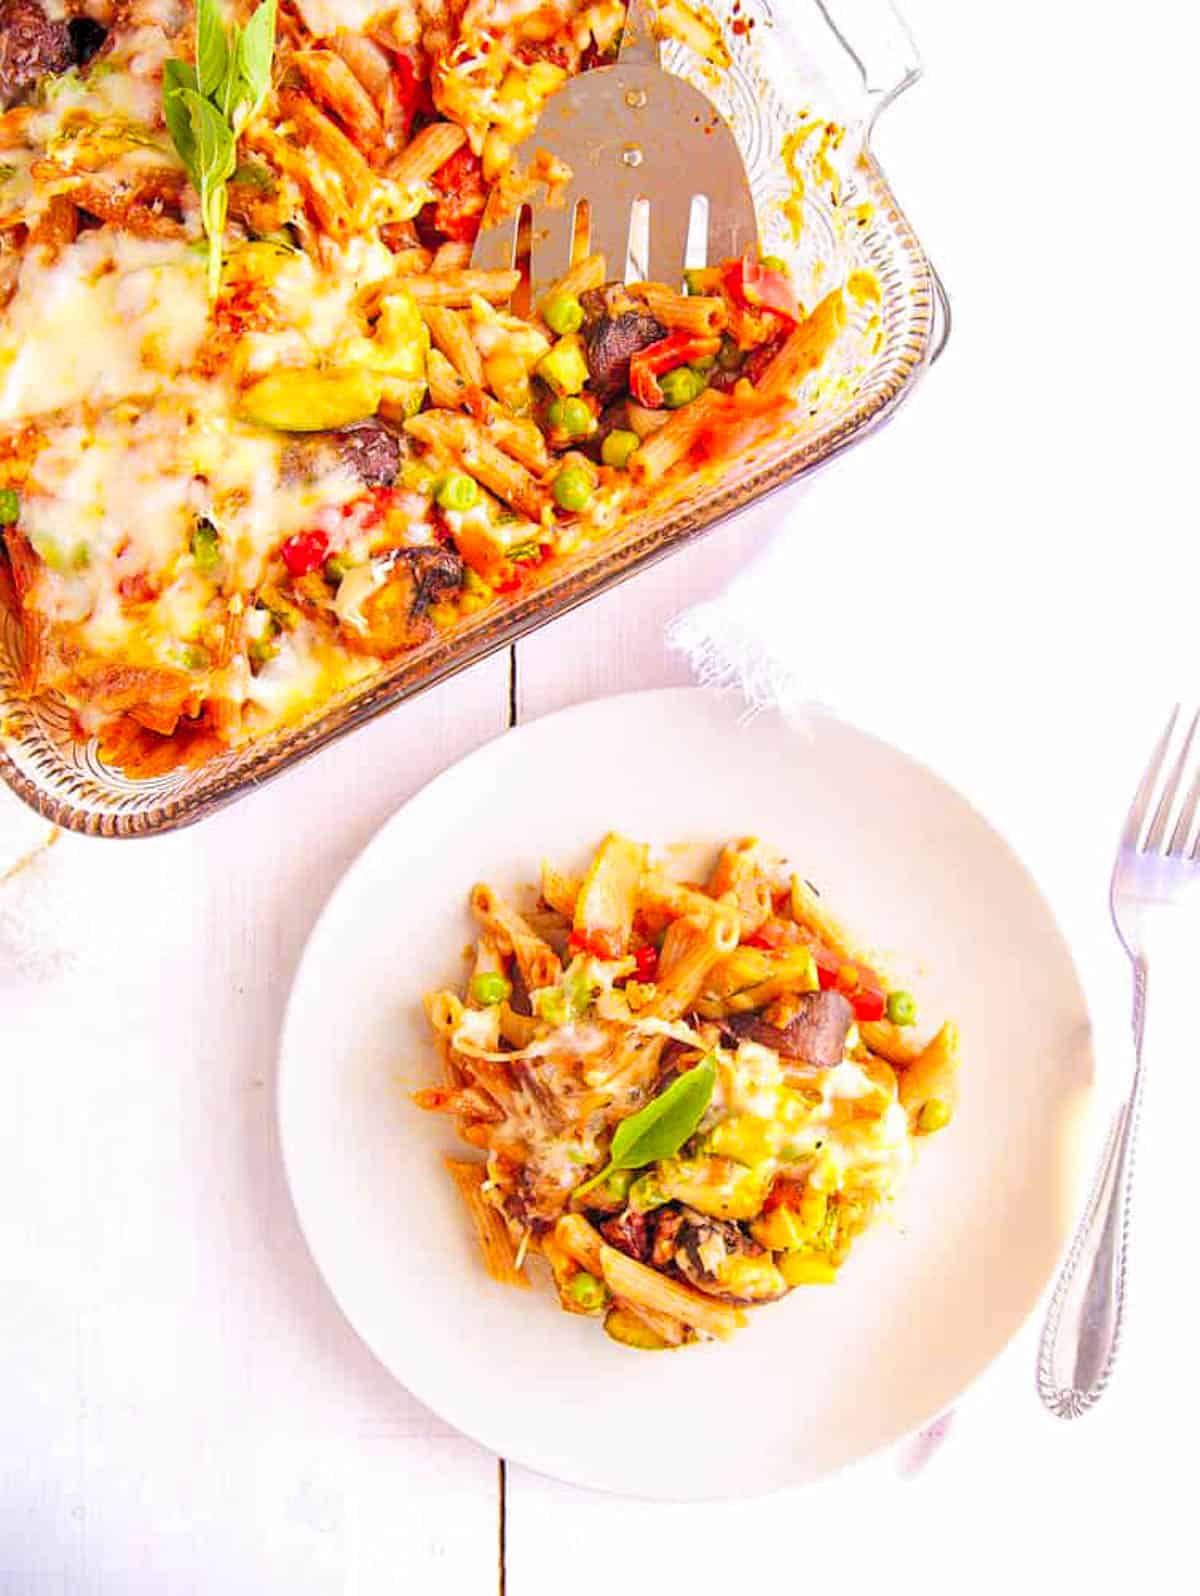 Baked penne in a glass baking dish with a serving on the side.